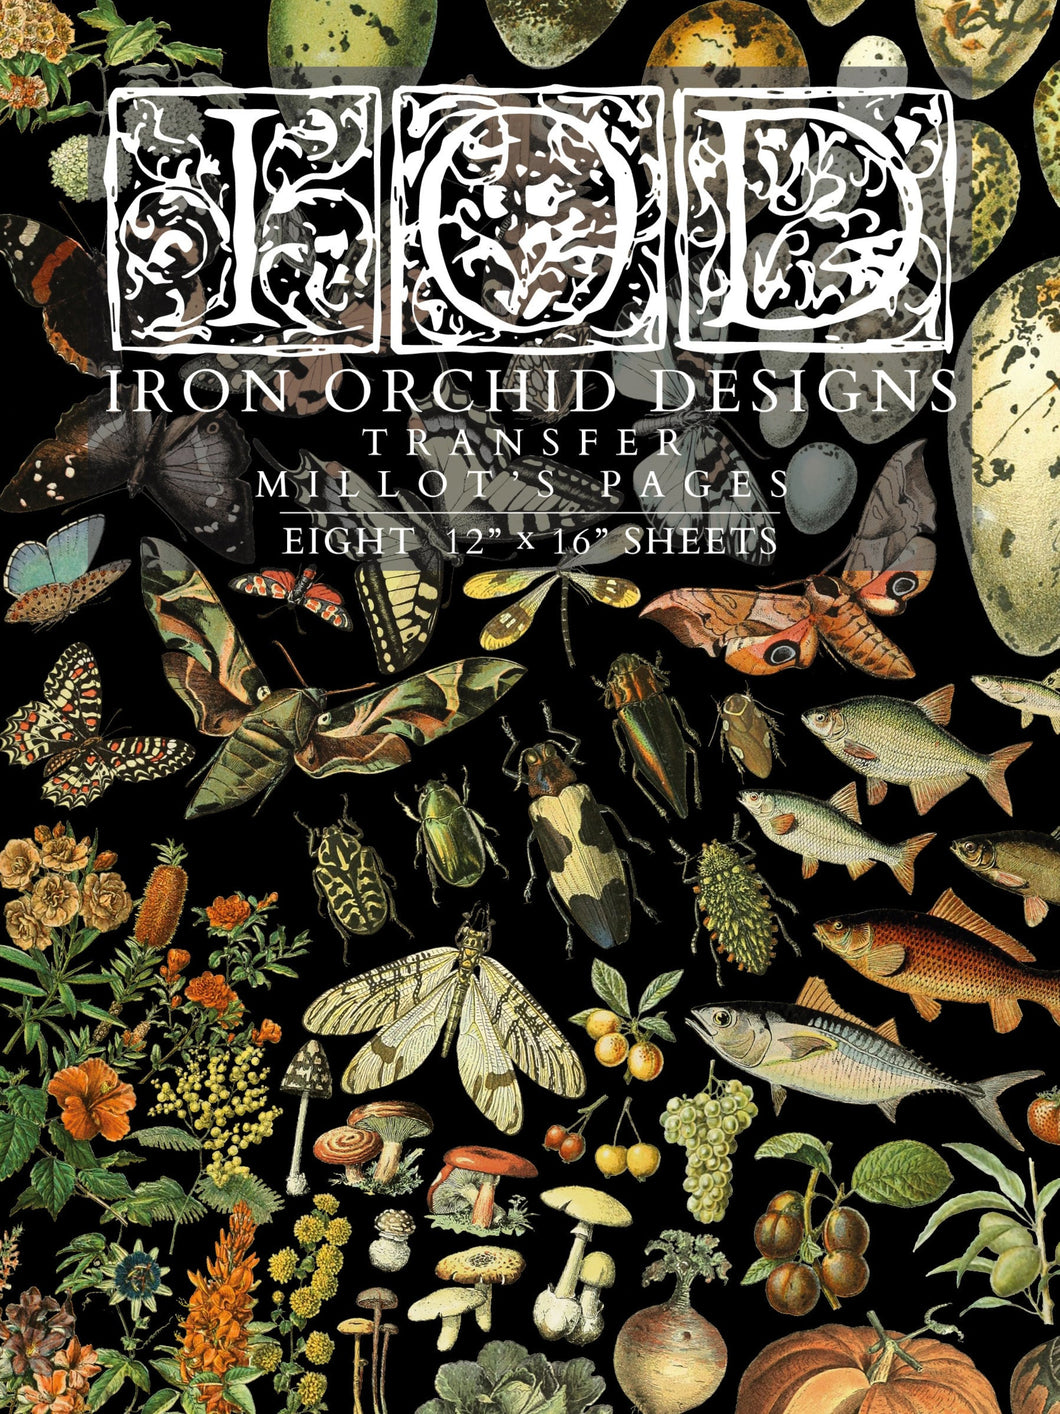 Millot's Pages Transfer by IOD, Iron Orchid Designs Cover